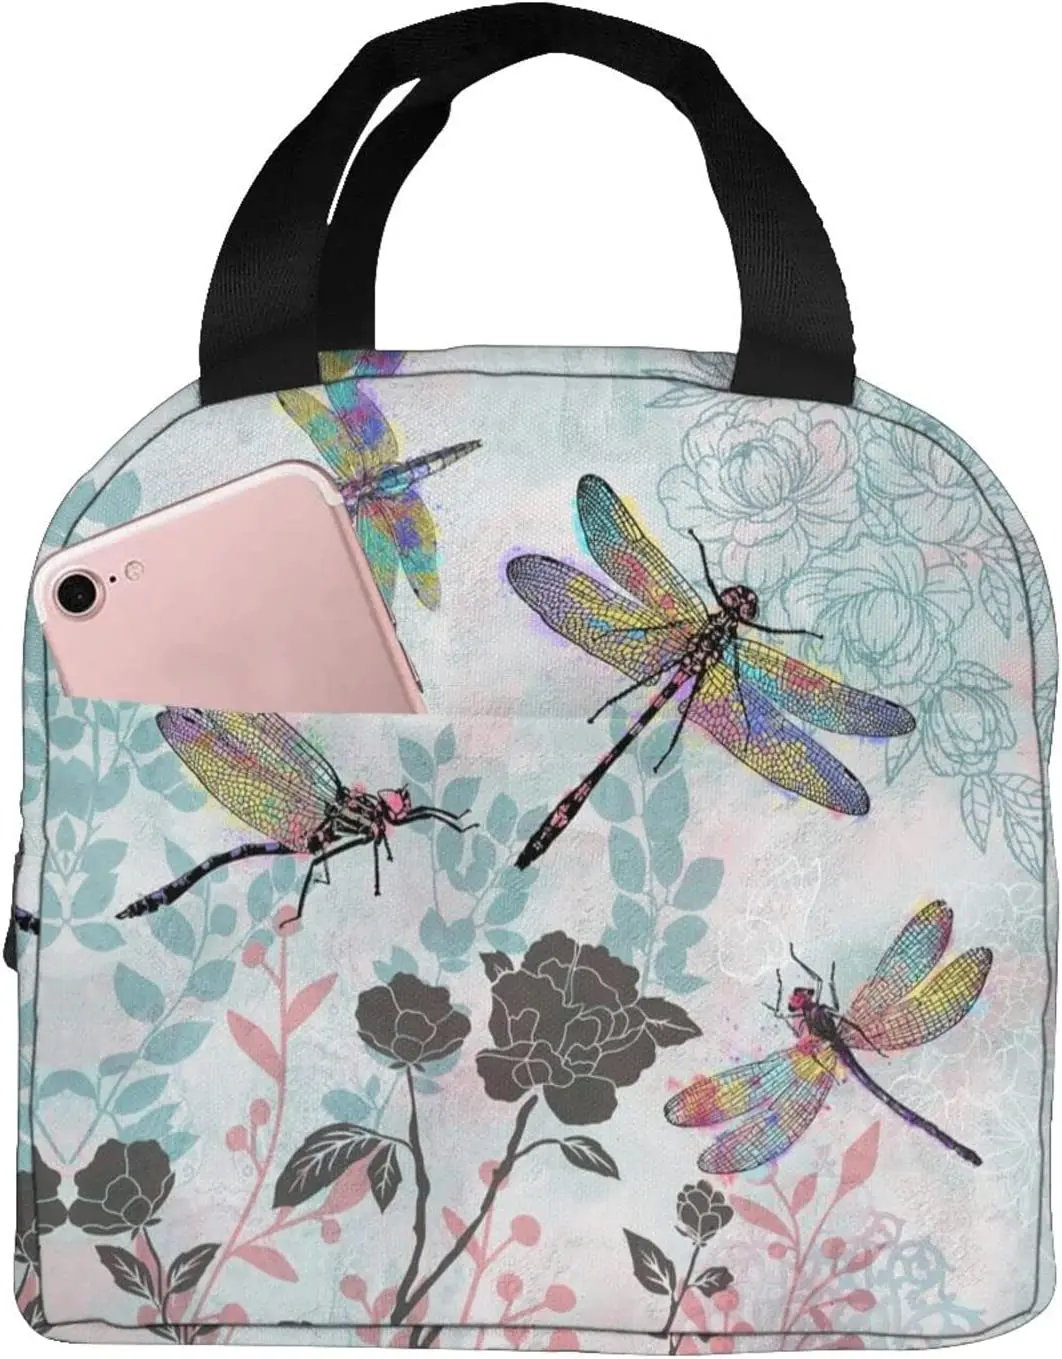 

Dragonfly Portable Tote Lunch Bags Insulated Lunch Box Cooler Lunch Bag for Picnic/Boating/Beach/Fishing/Work Girls